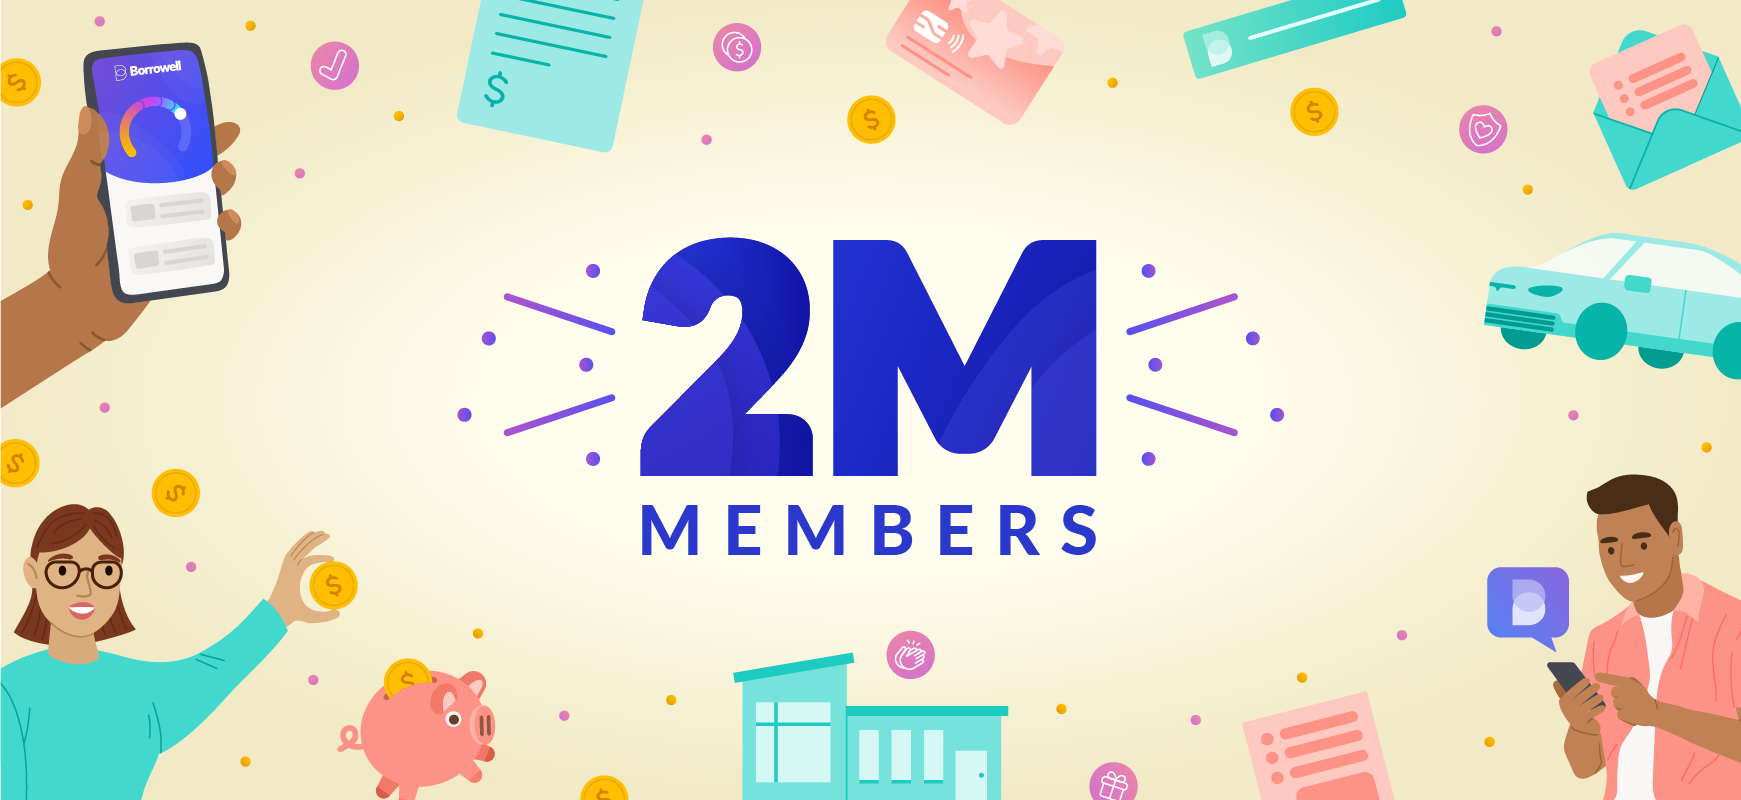 Borrowell now has over 2 million members